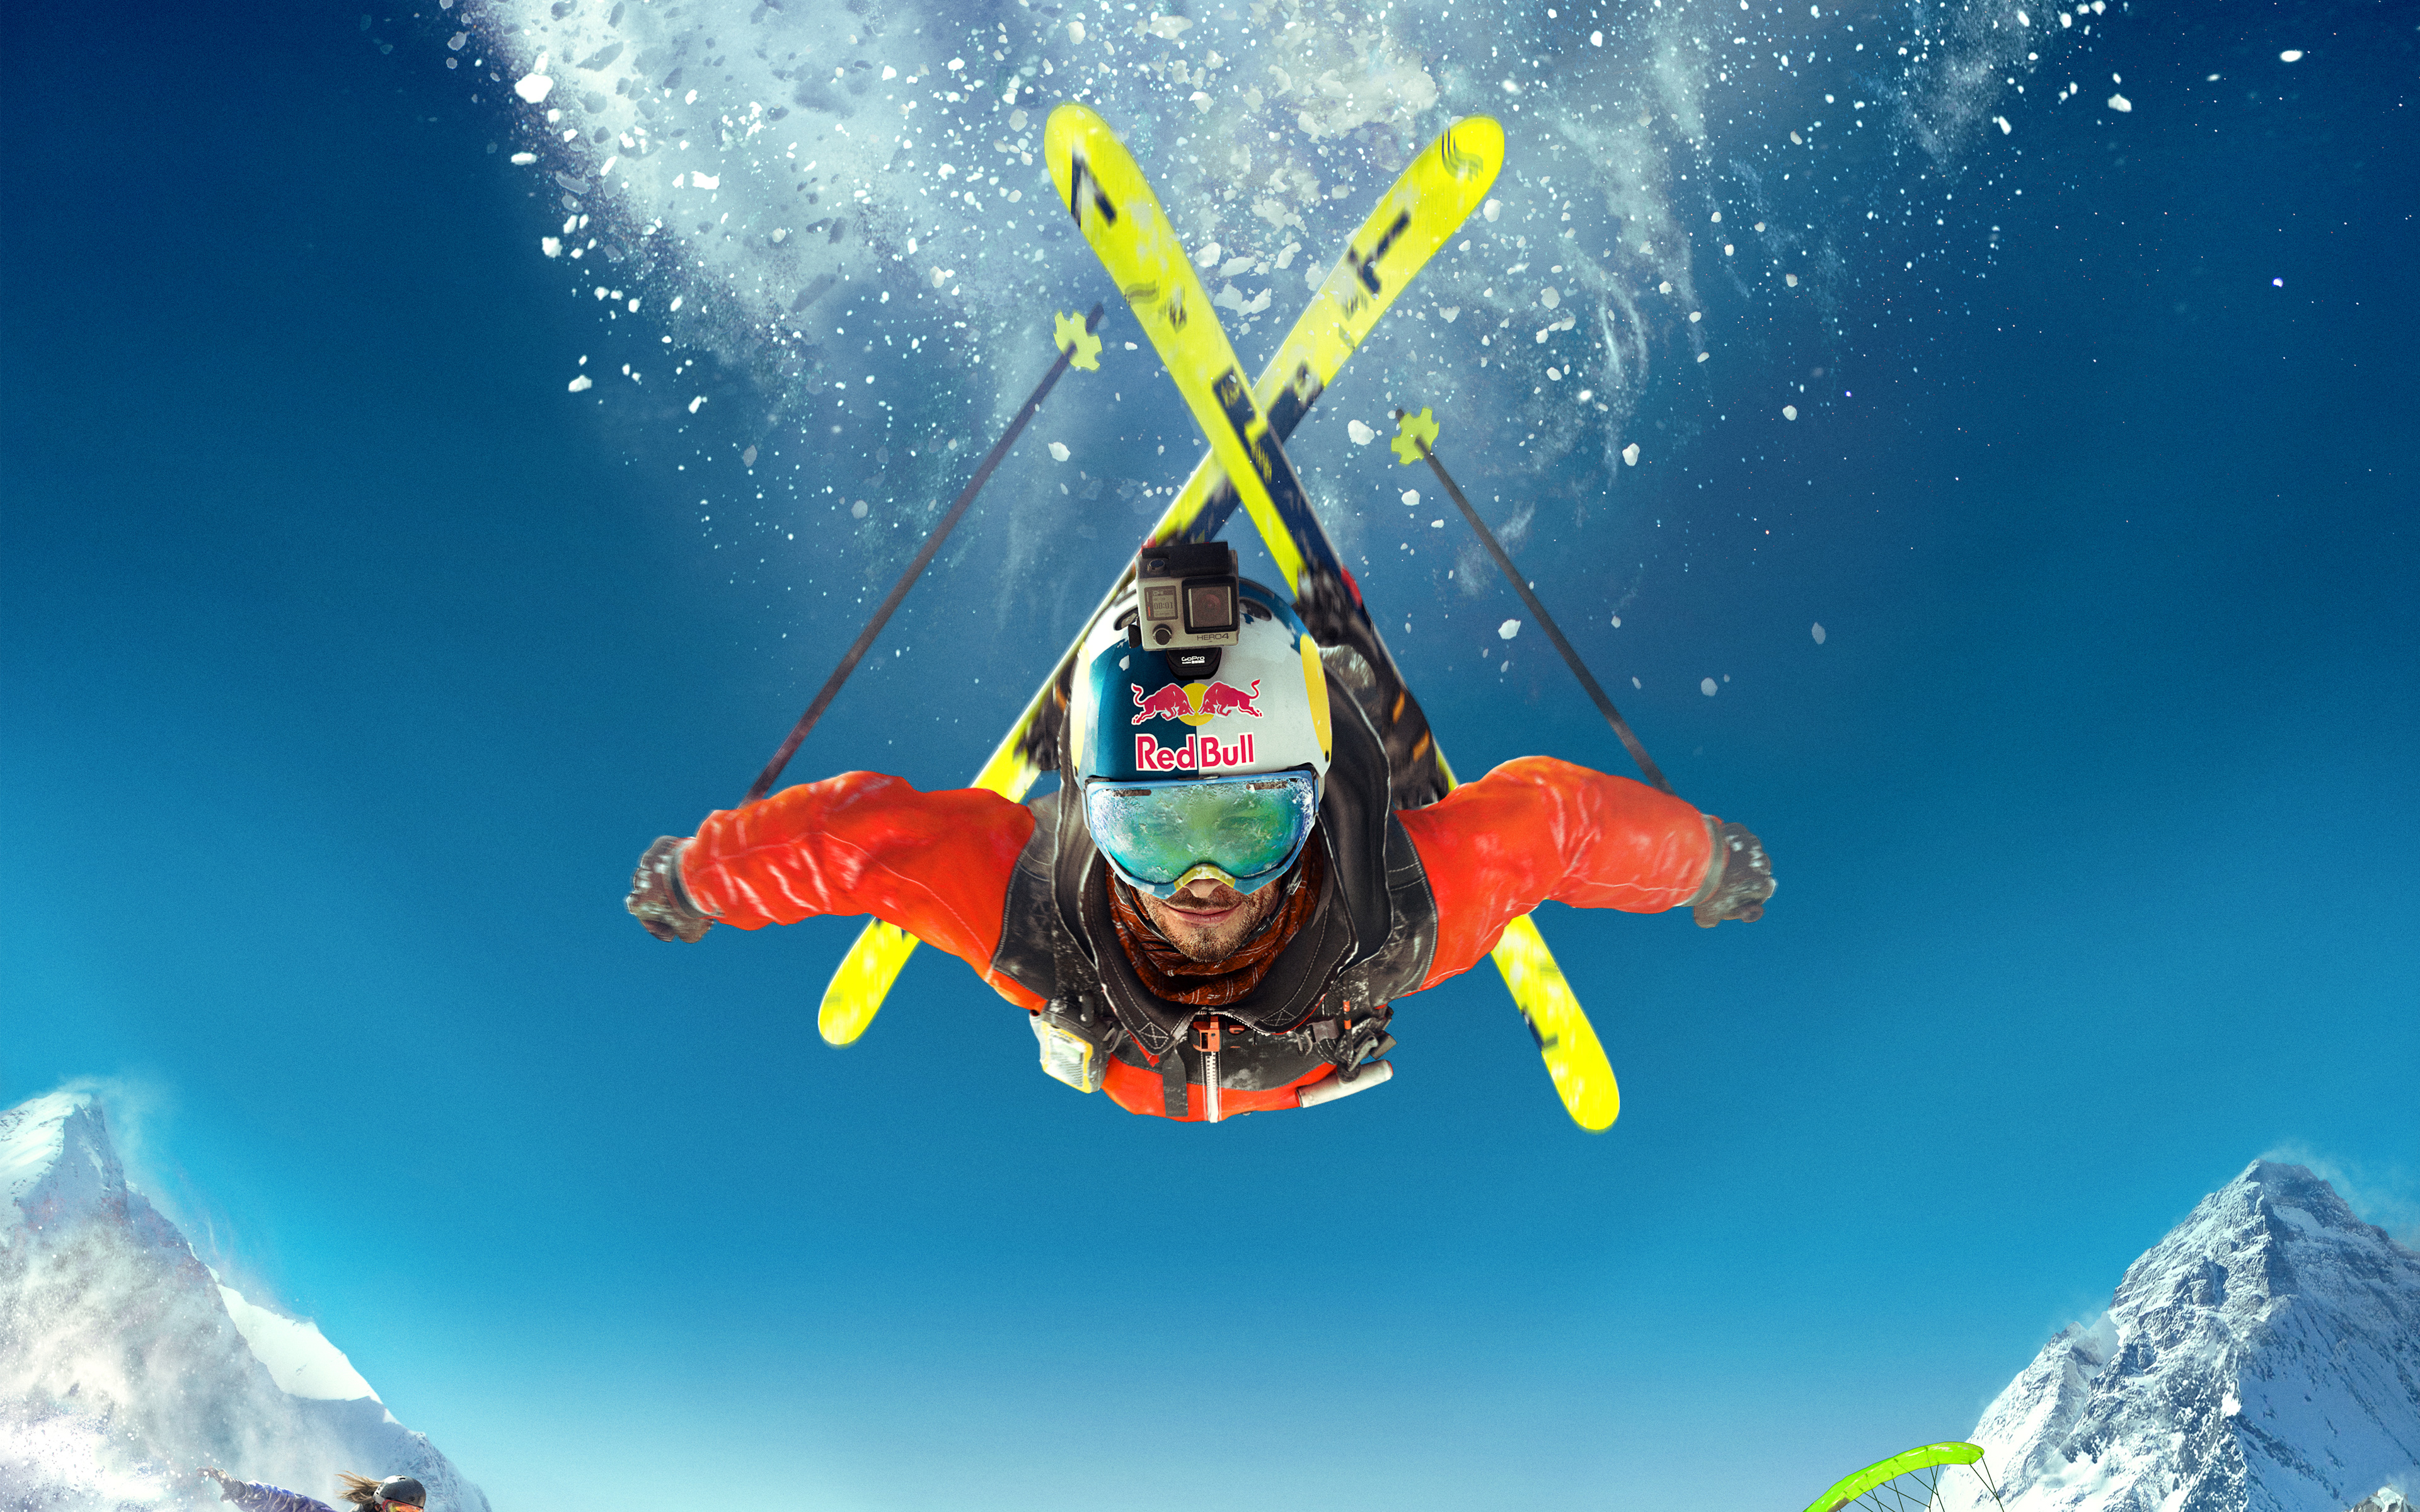 Snow Skiing In Action  Download Free HD Mobile Wallpapers